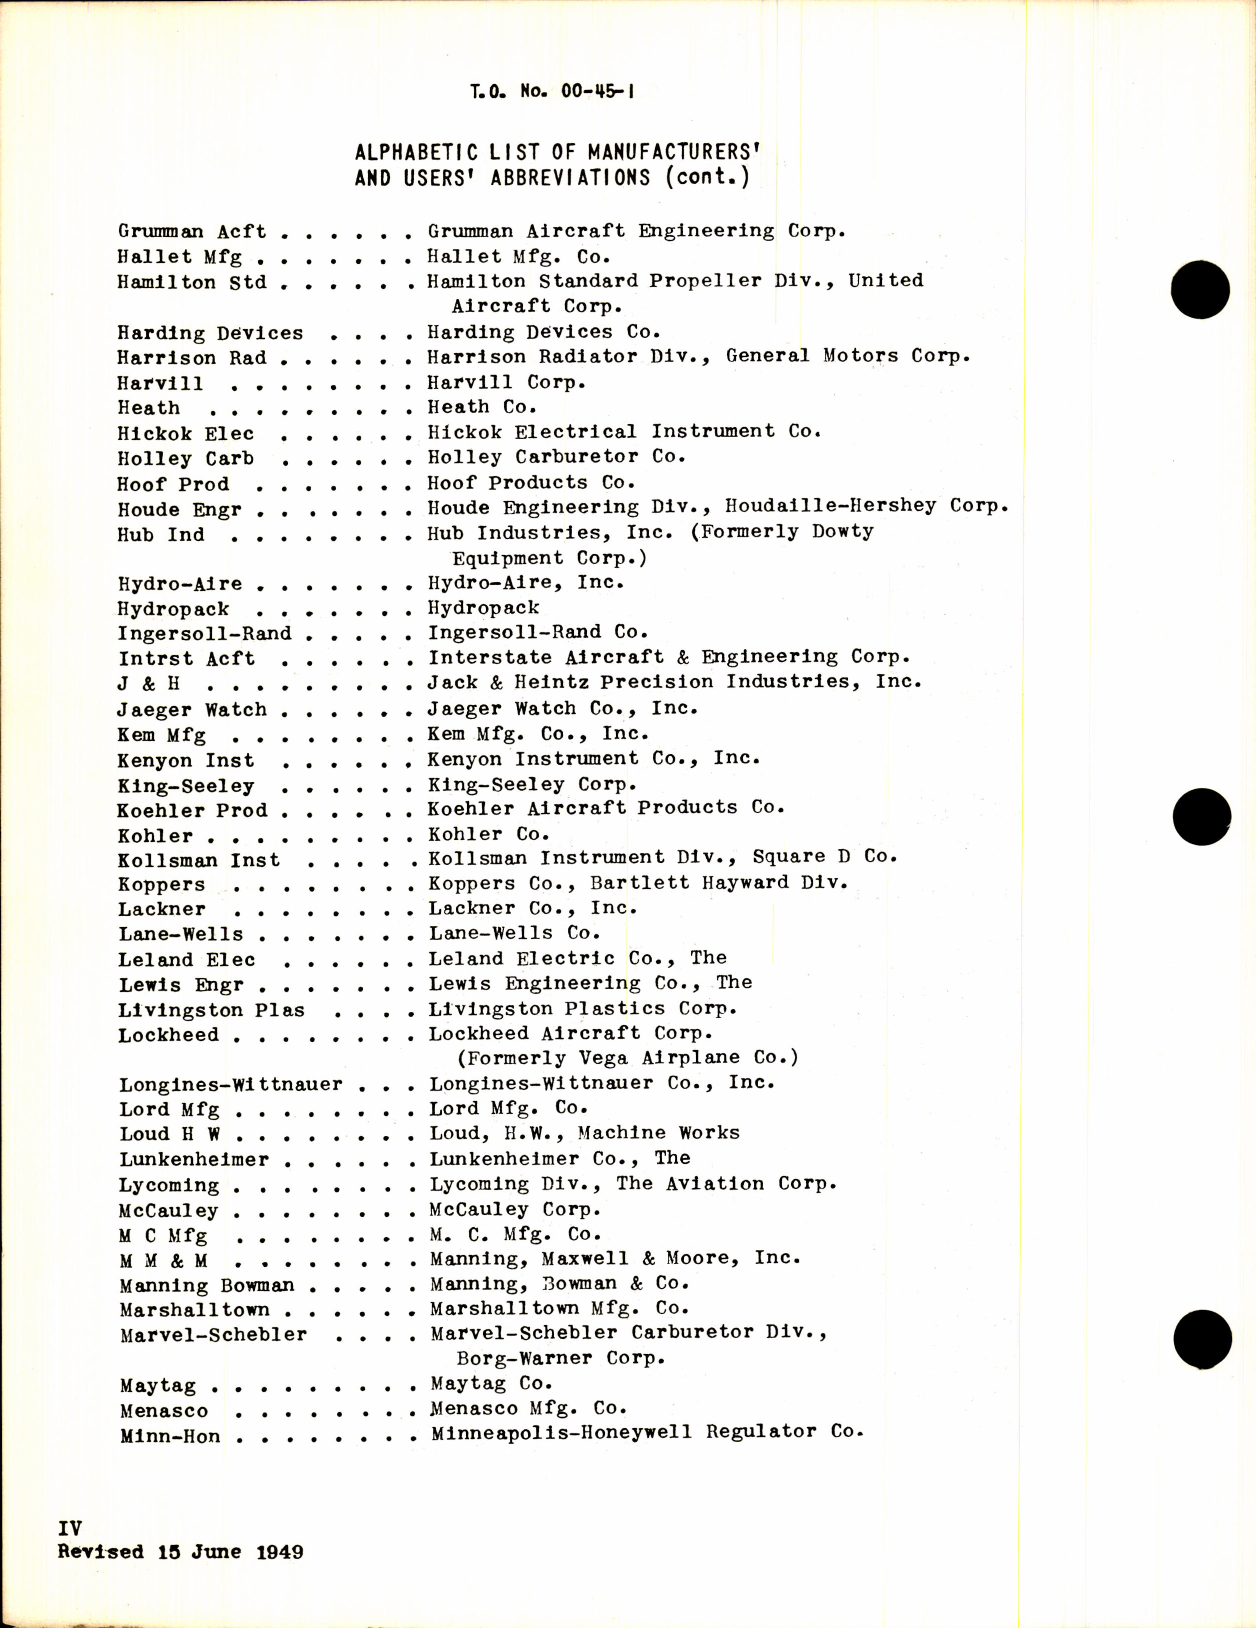 Sample page 6 from AirCorps Library document: Interchangeability Charts - Accessories for Aircraft Engines